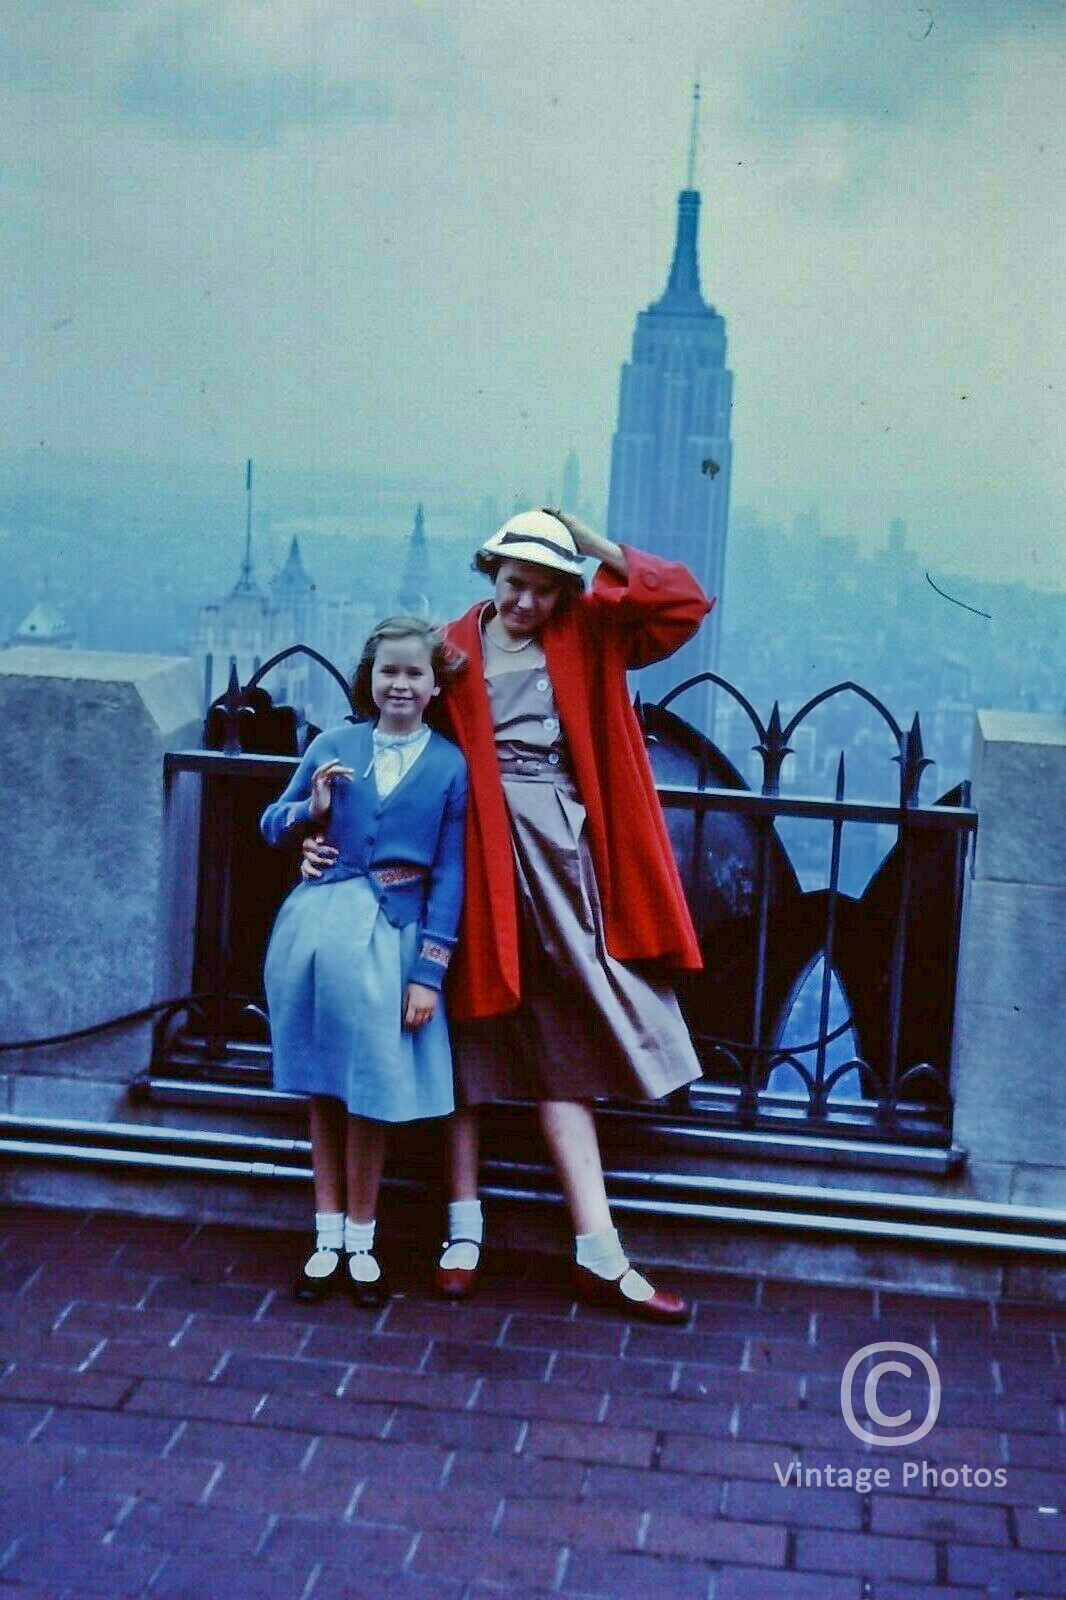 1950s American Fashion - Red Coat - Empire State Building New York